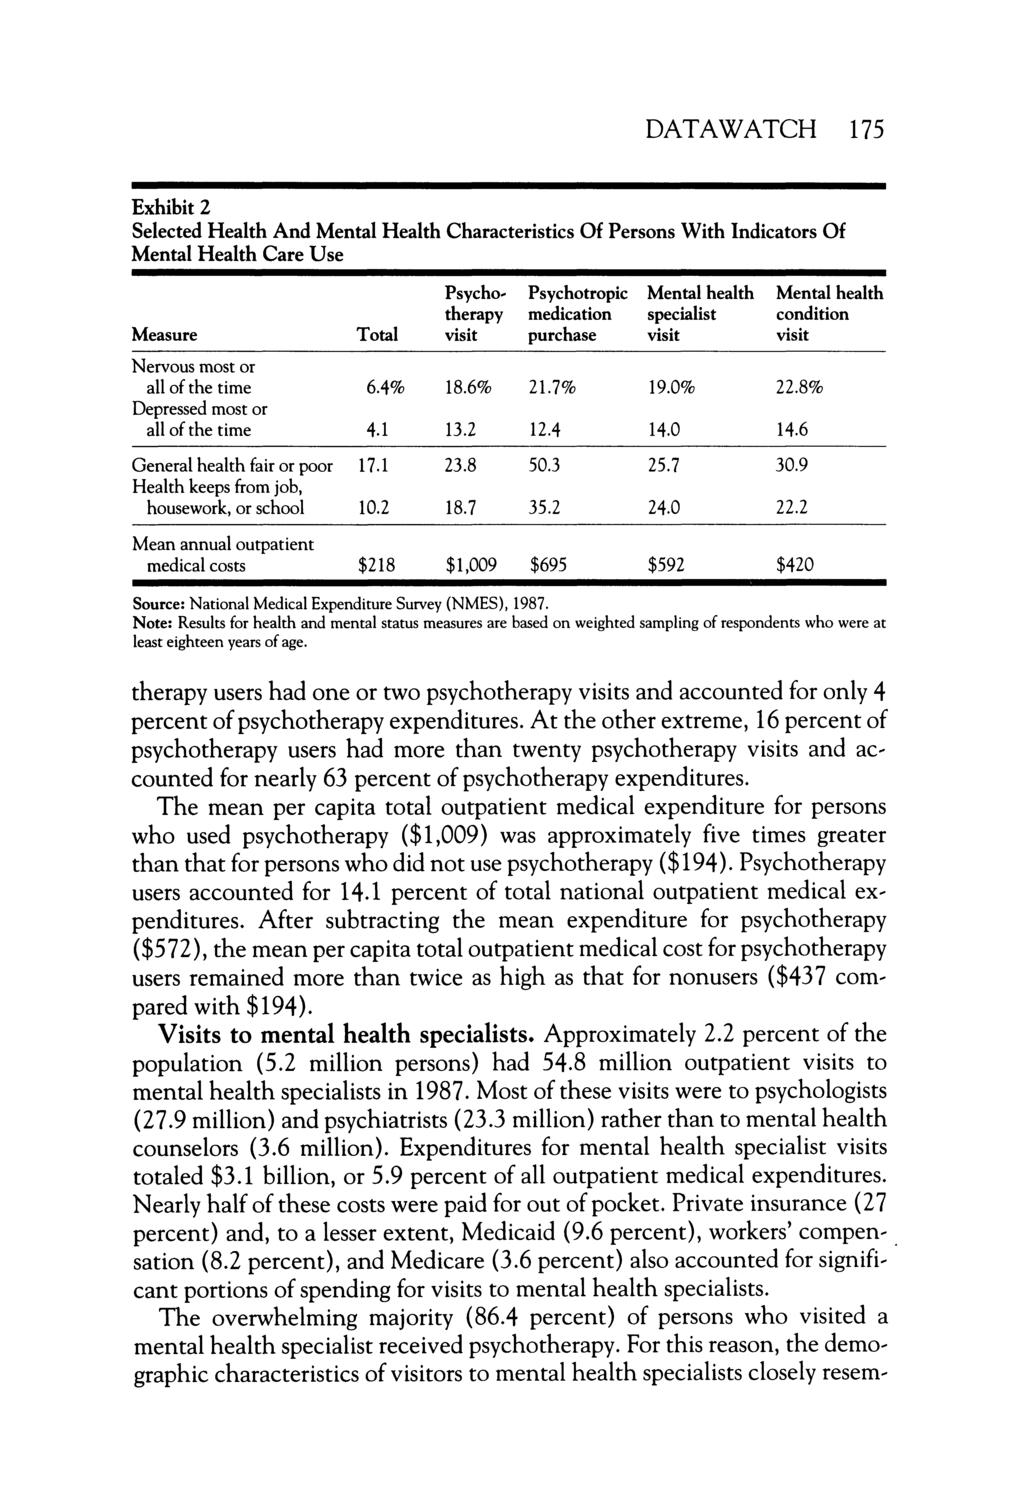 DATAWATCH 175 Exhibit 2 Selected Health And Mental Health Characteristics Of Persons With Indicators Of Mental Health Care Use Measure Total therapy Psycho- Psychotropic medication purchase Mental